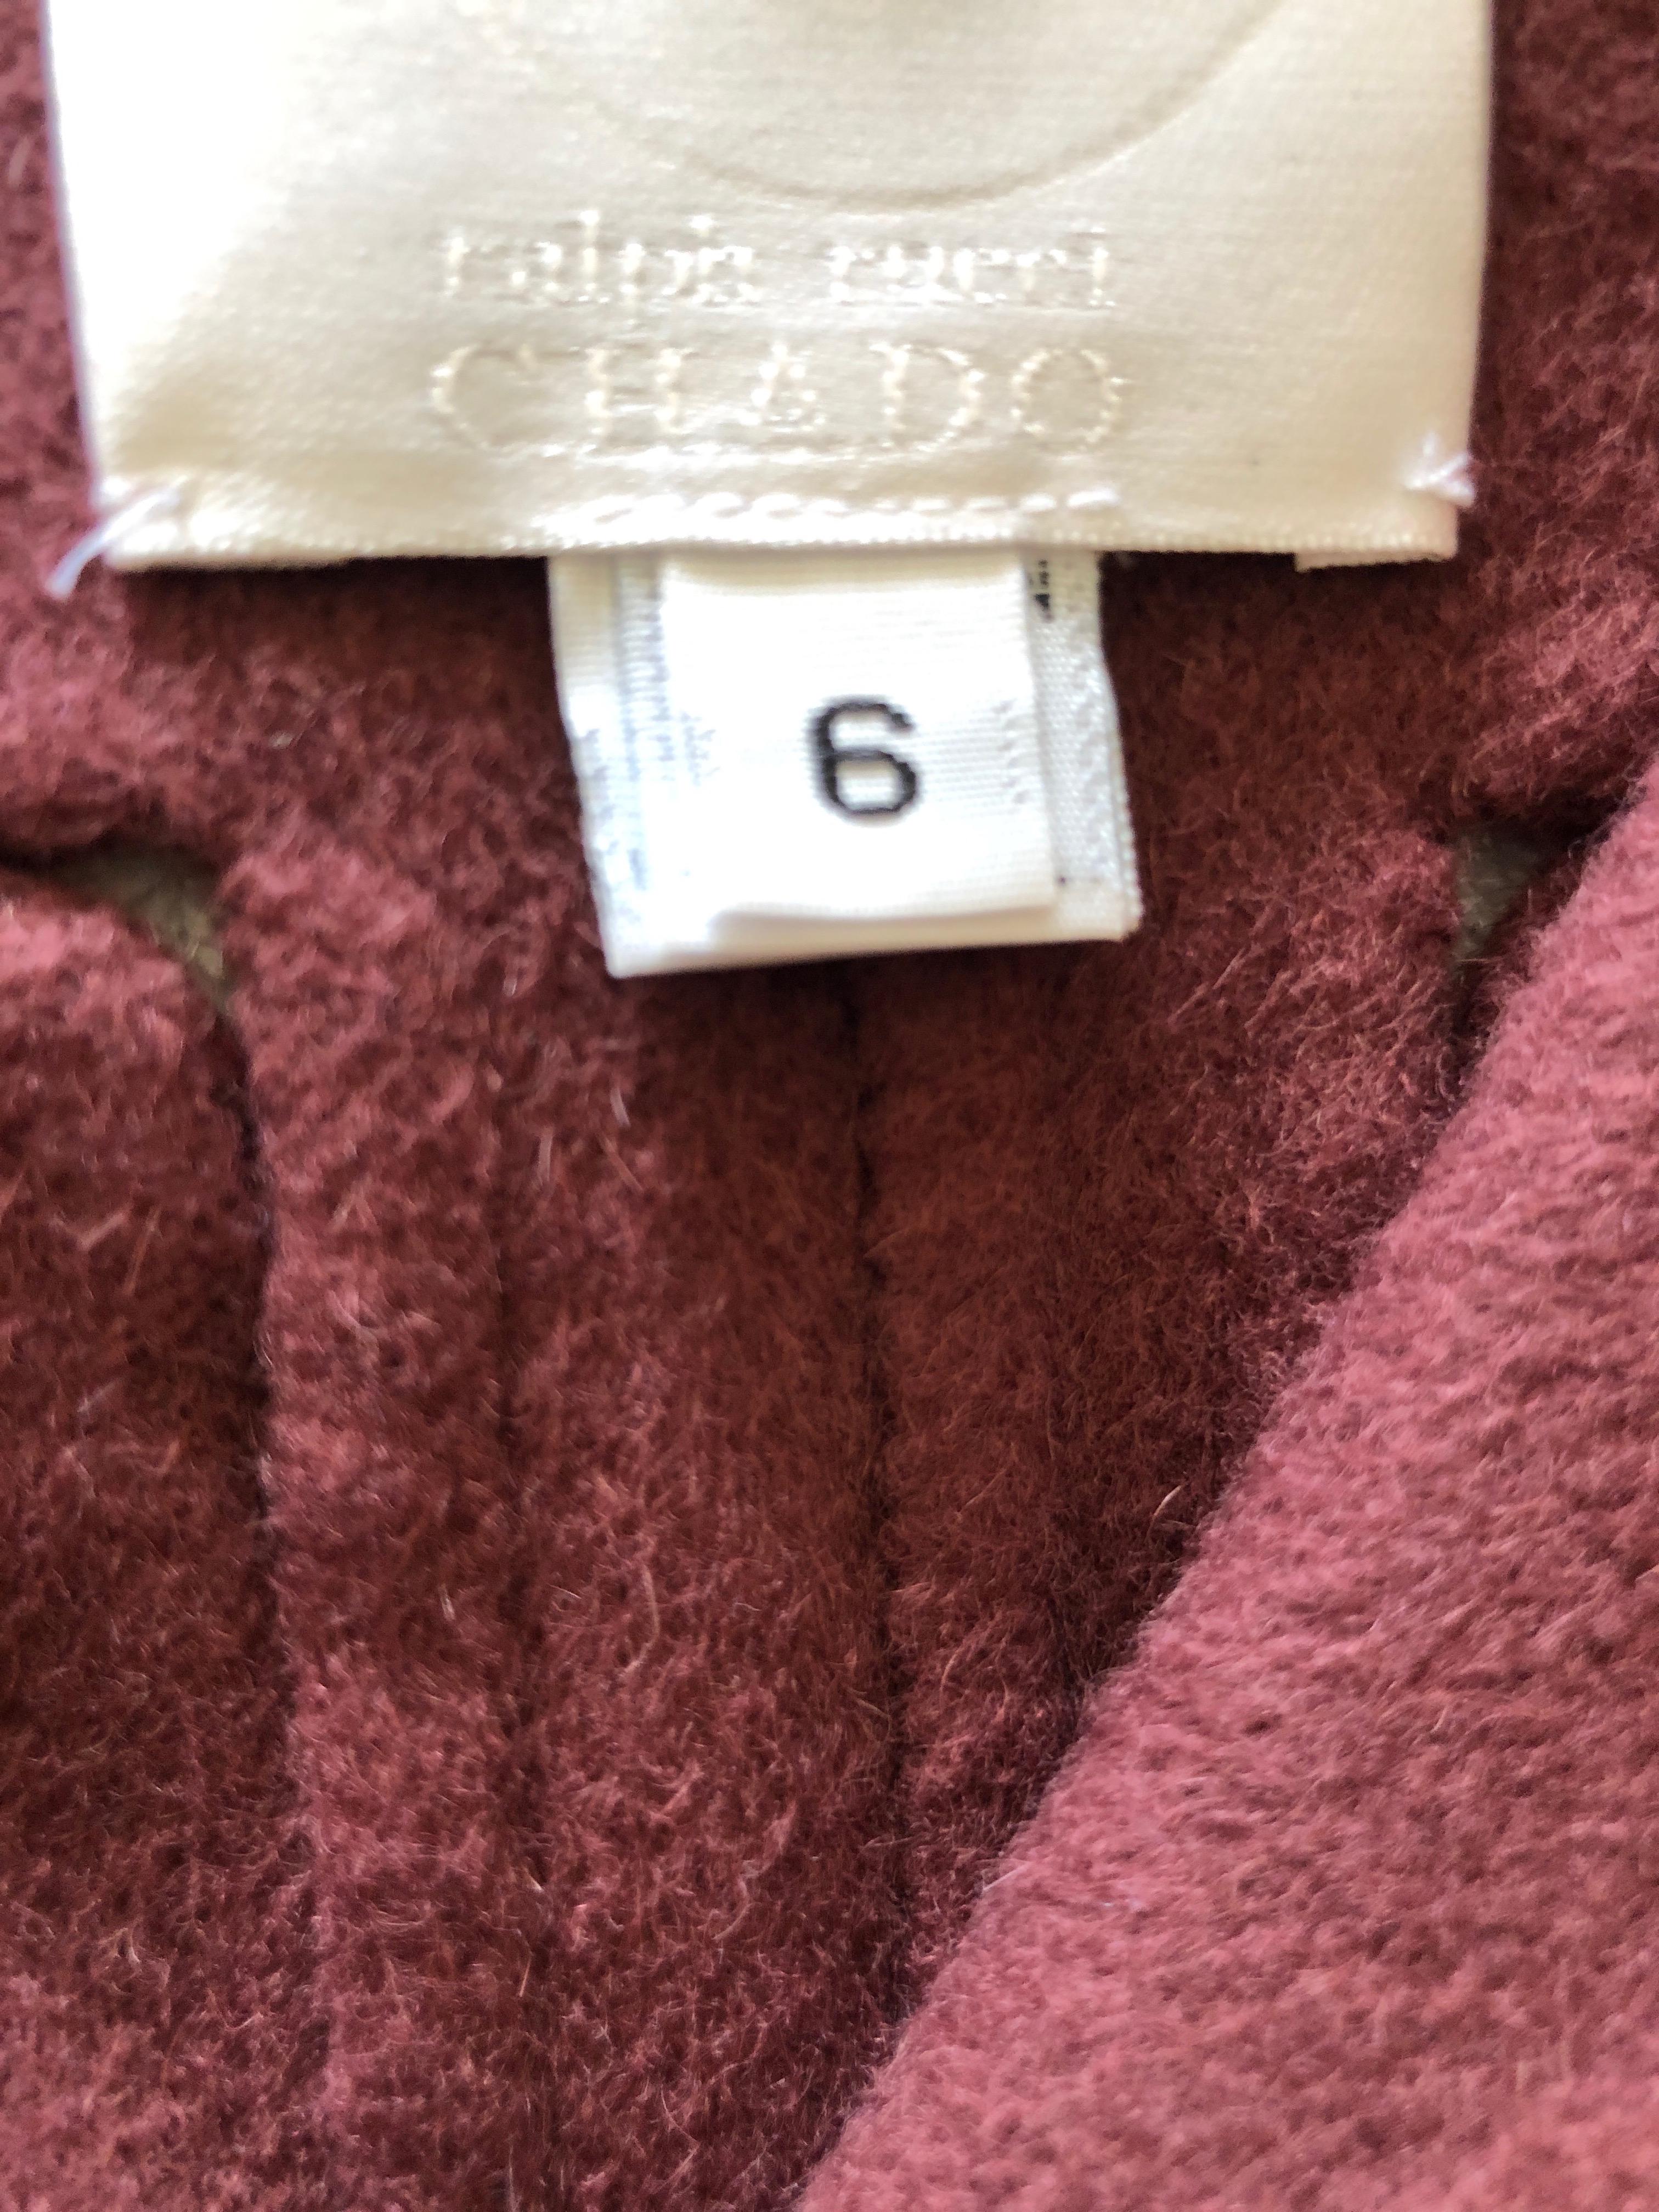 Chado Ralph Rucci Luxurious Doubleface Cashmere Jacket w Open Stitch Details  
This is a work of art, sublime.
The details on this are so cool. Photos don't really capture the details.
Size 6
Bust 36